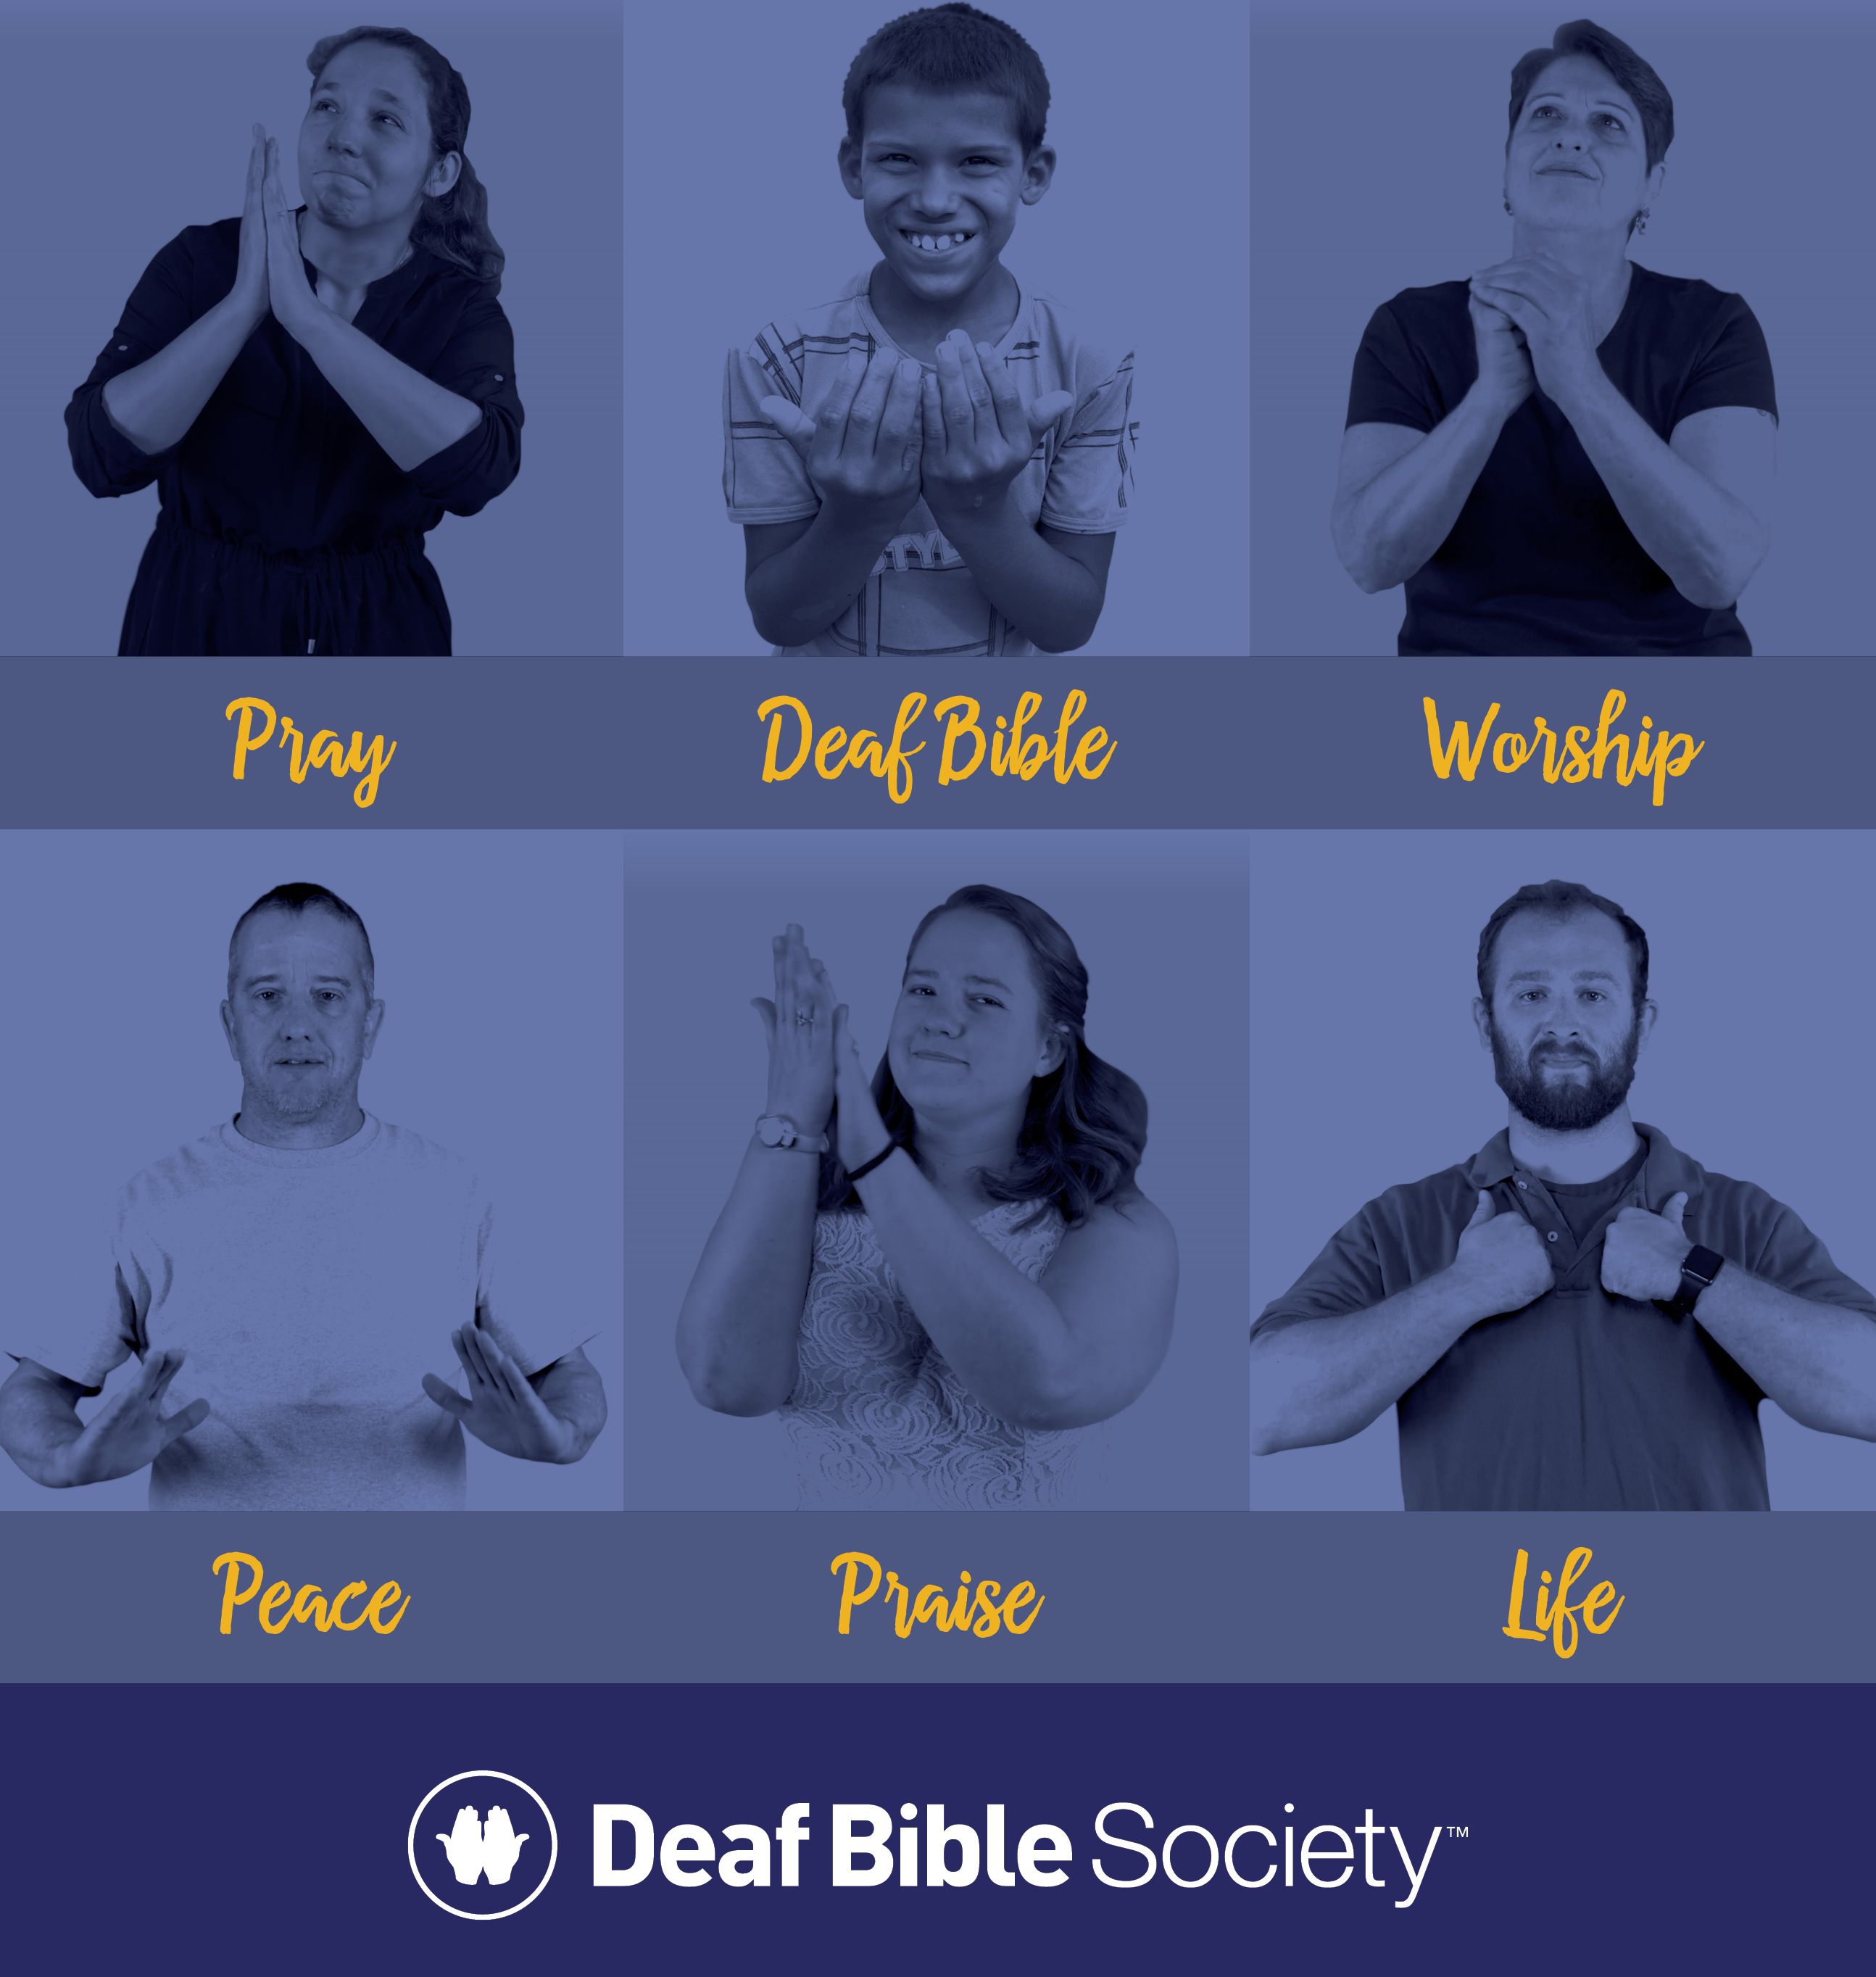 Deaf Bible offers free digital wallpaper to spur prayer, advocacy